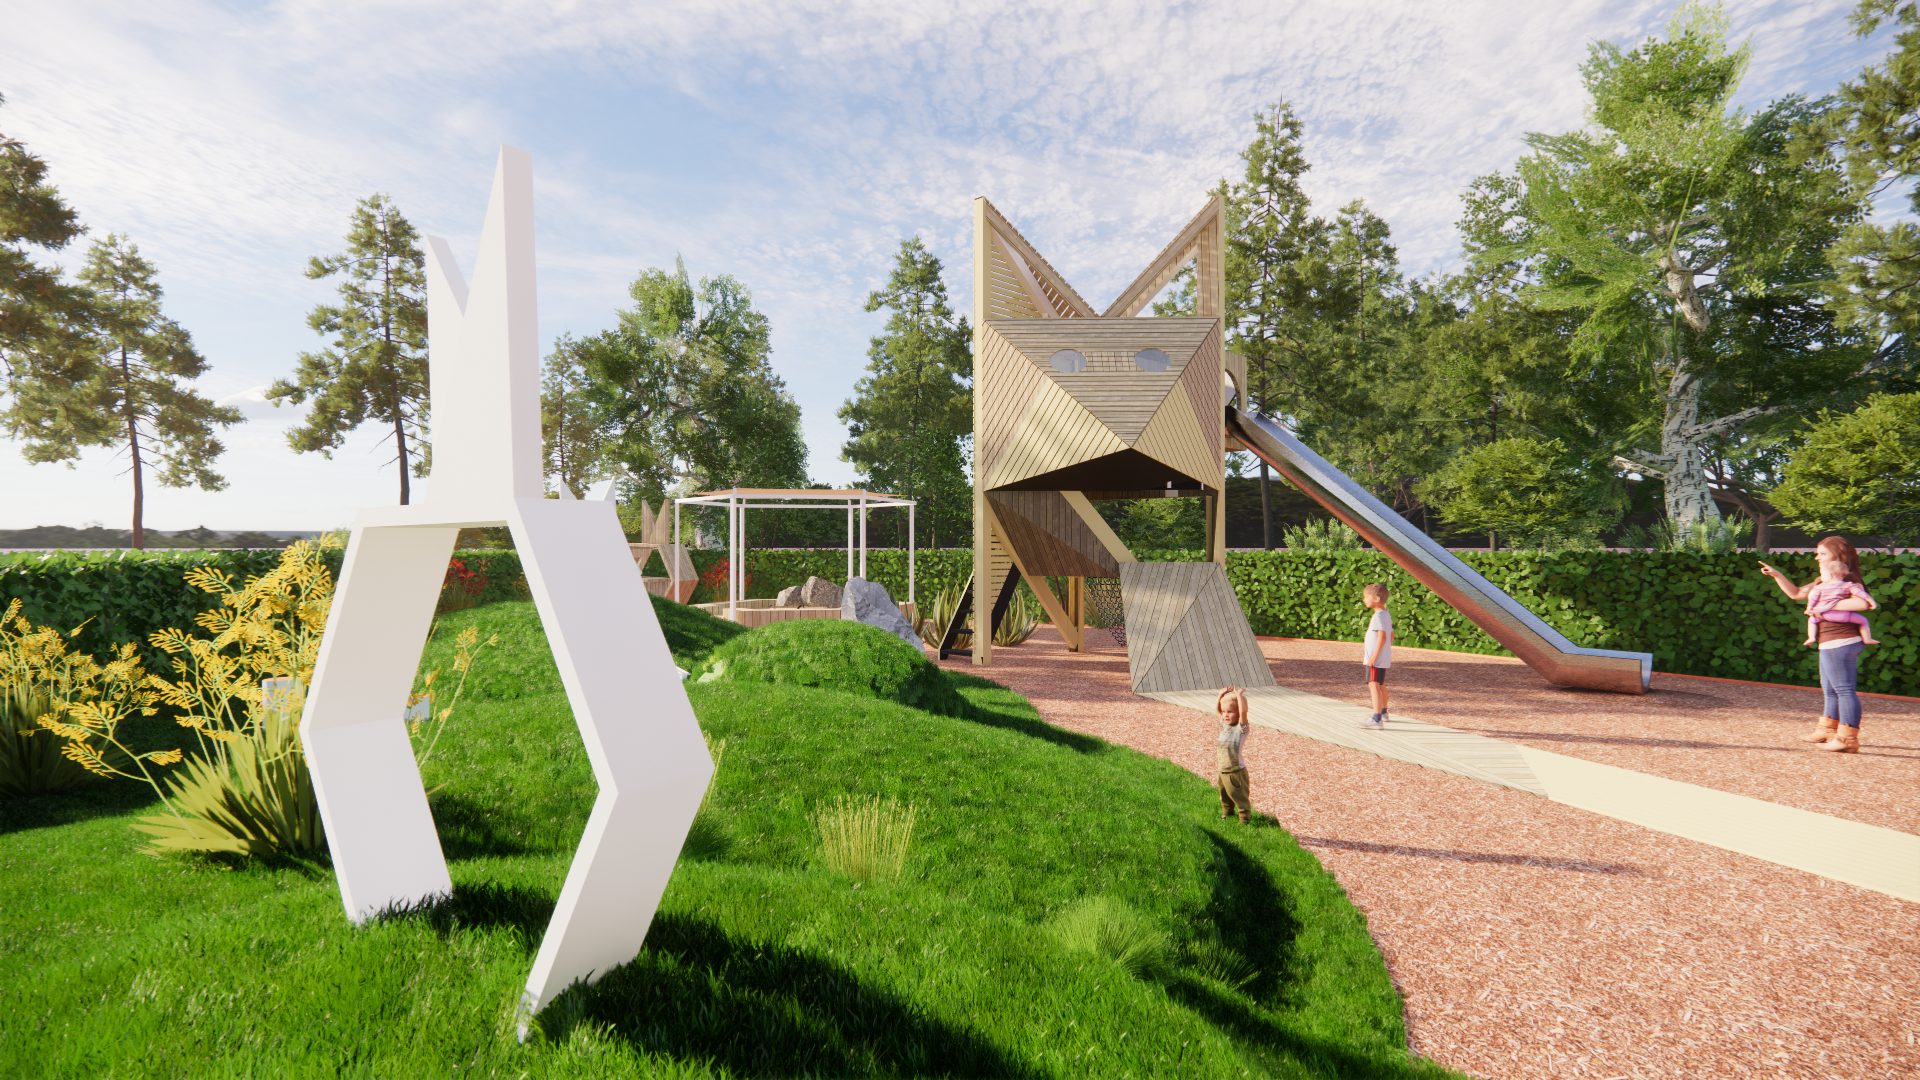 Stoerrr created two outdoor playground concepts for Marriott Hotels & resorts